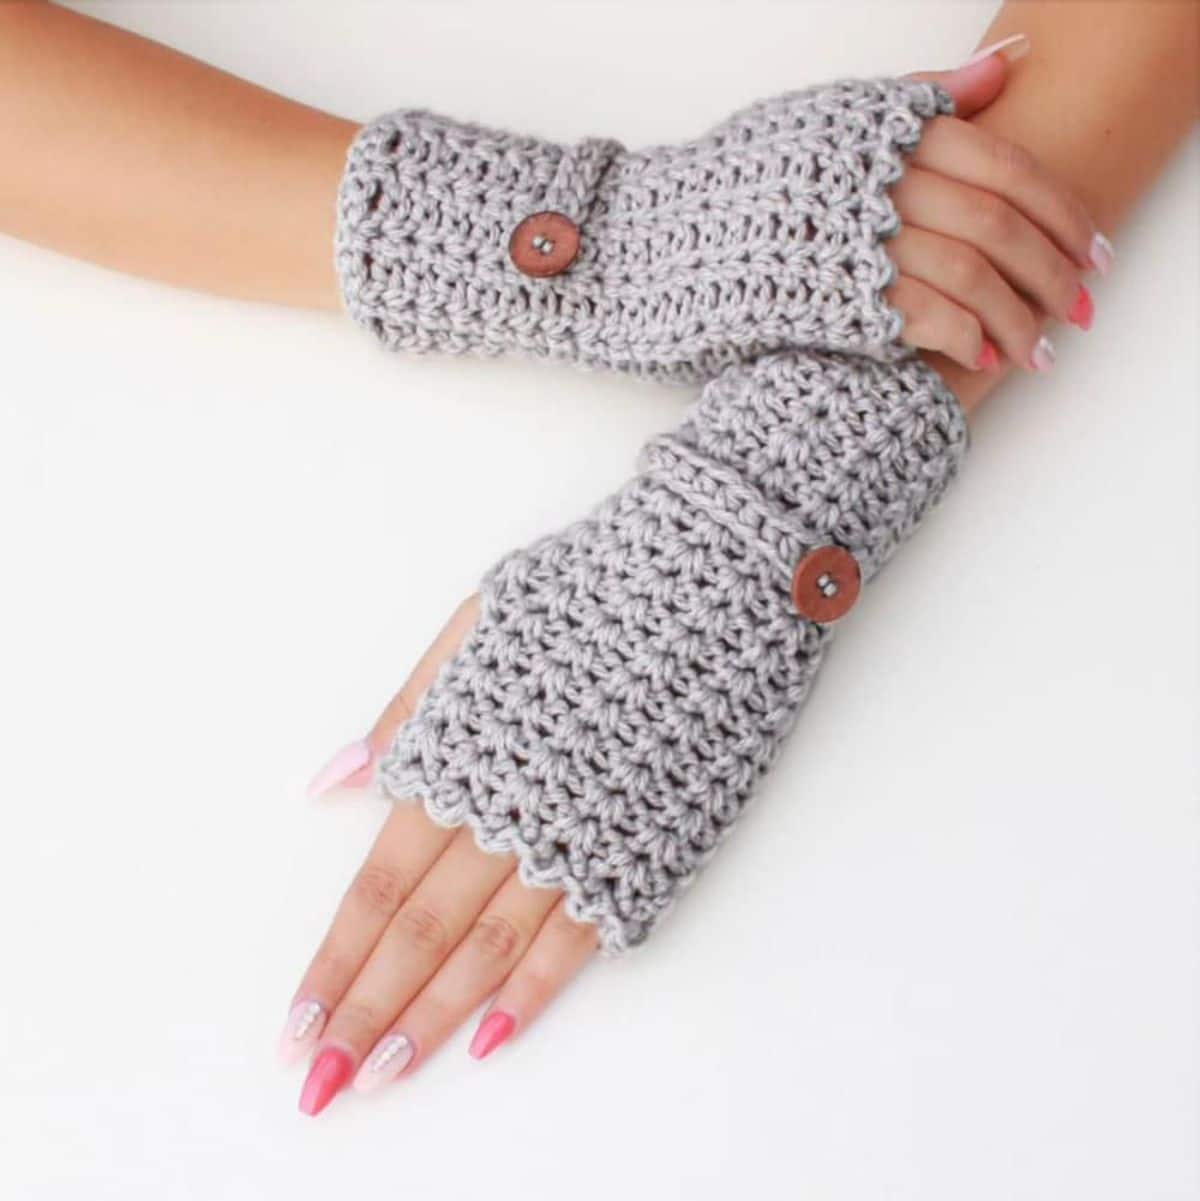 Manicured hands wearing gray crochet fingerless gloves with a band and button around the wrist to secure them.